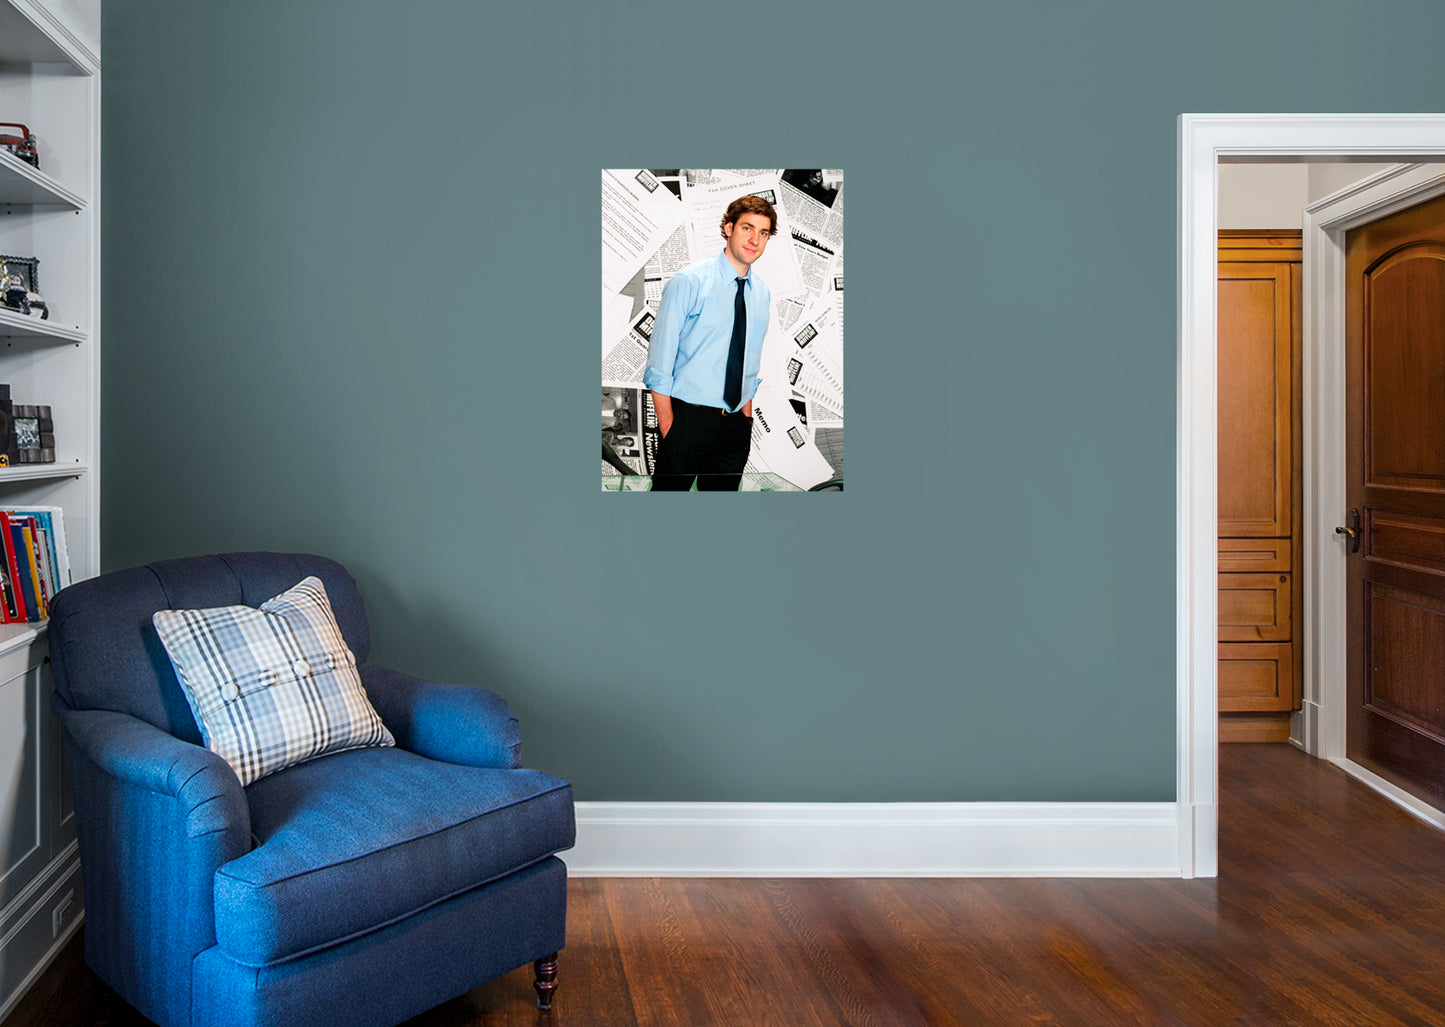 The Office: Jim Mural        - Officially Licensed NBC Universal Removable Wall   Adhesive Decal